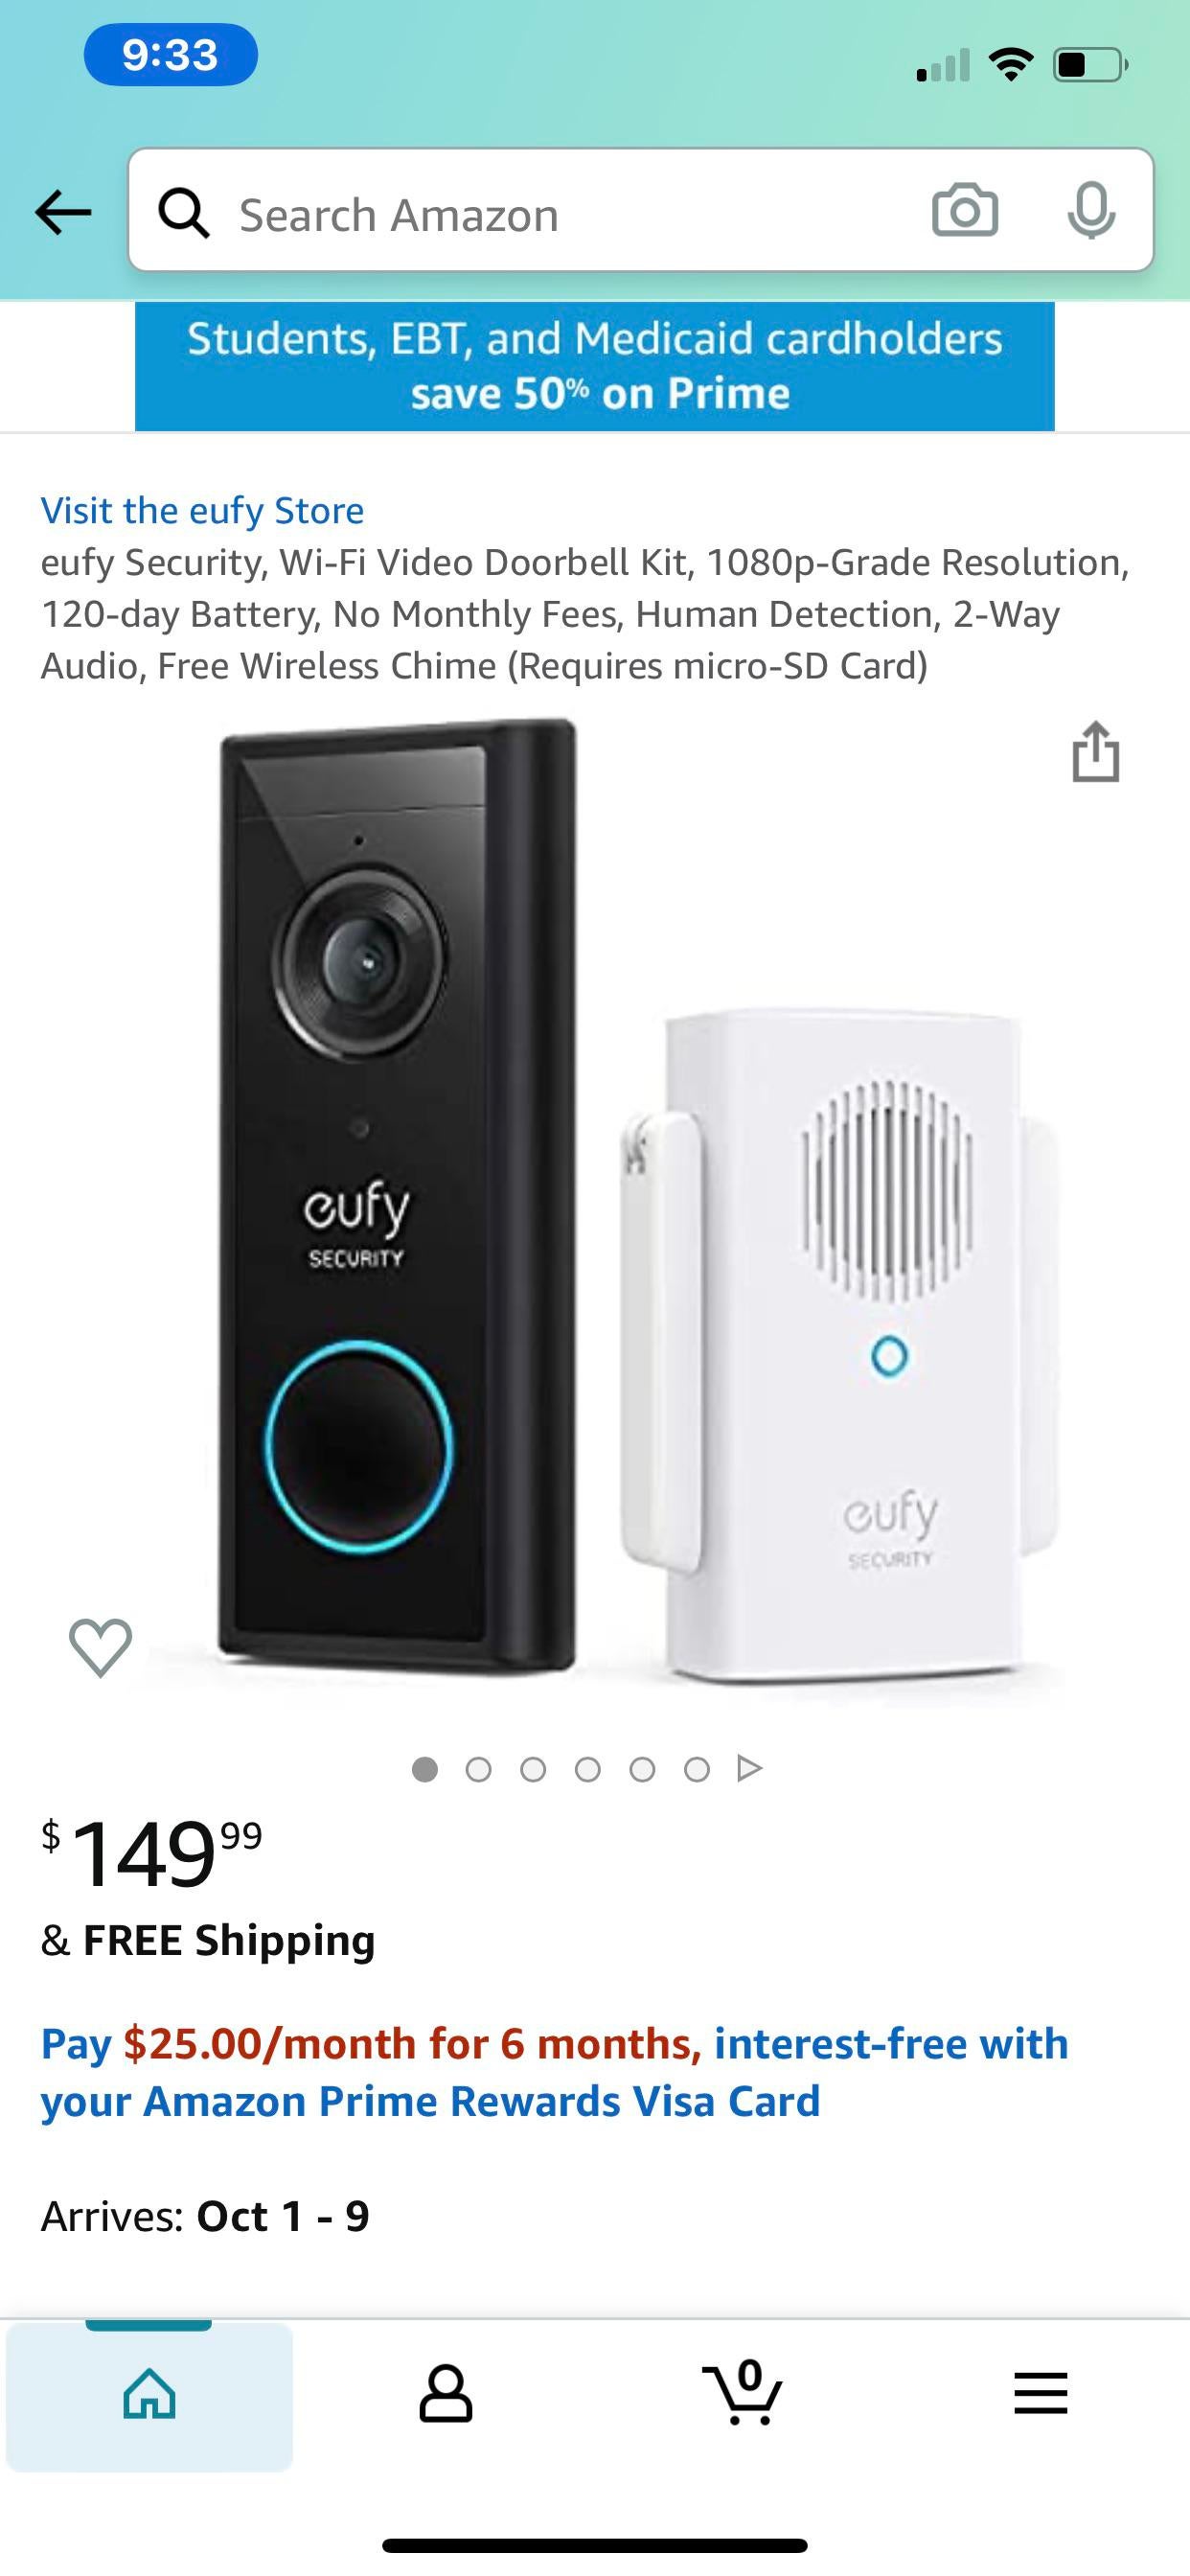 The new Eufy video sound and wifi ringtone on Amazon